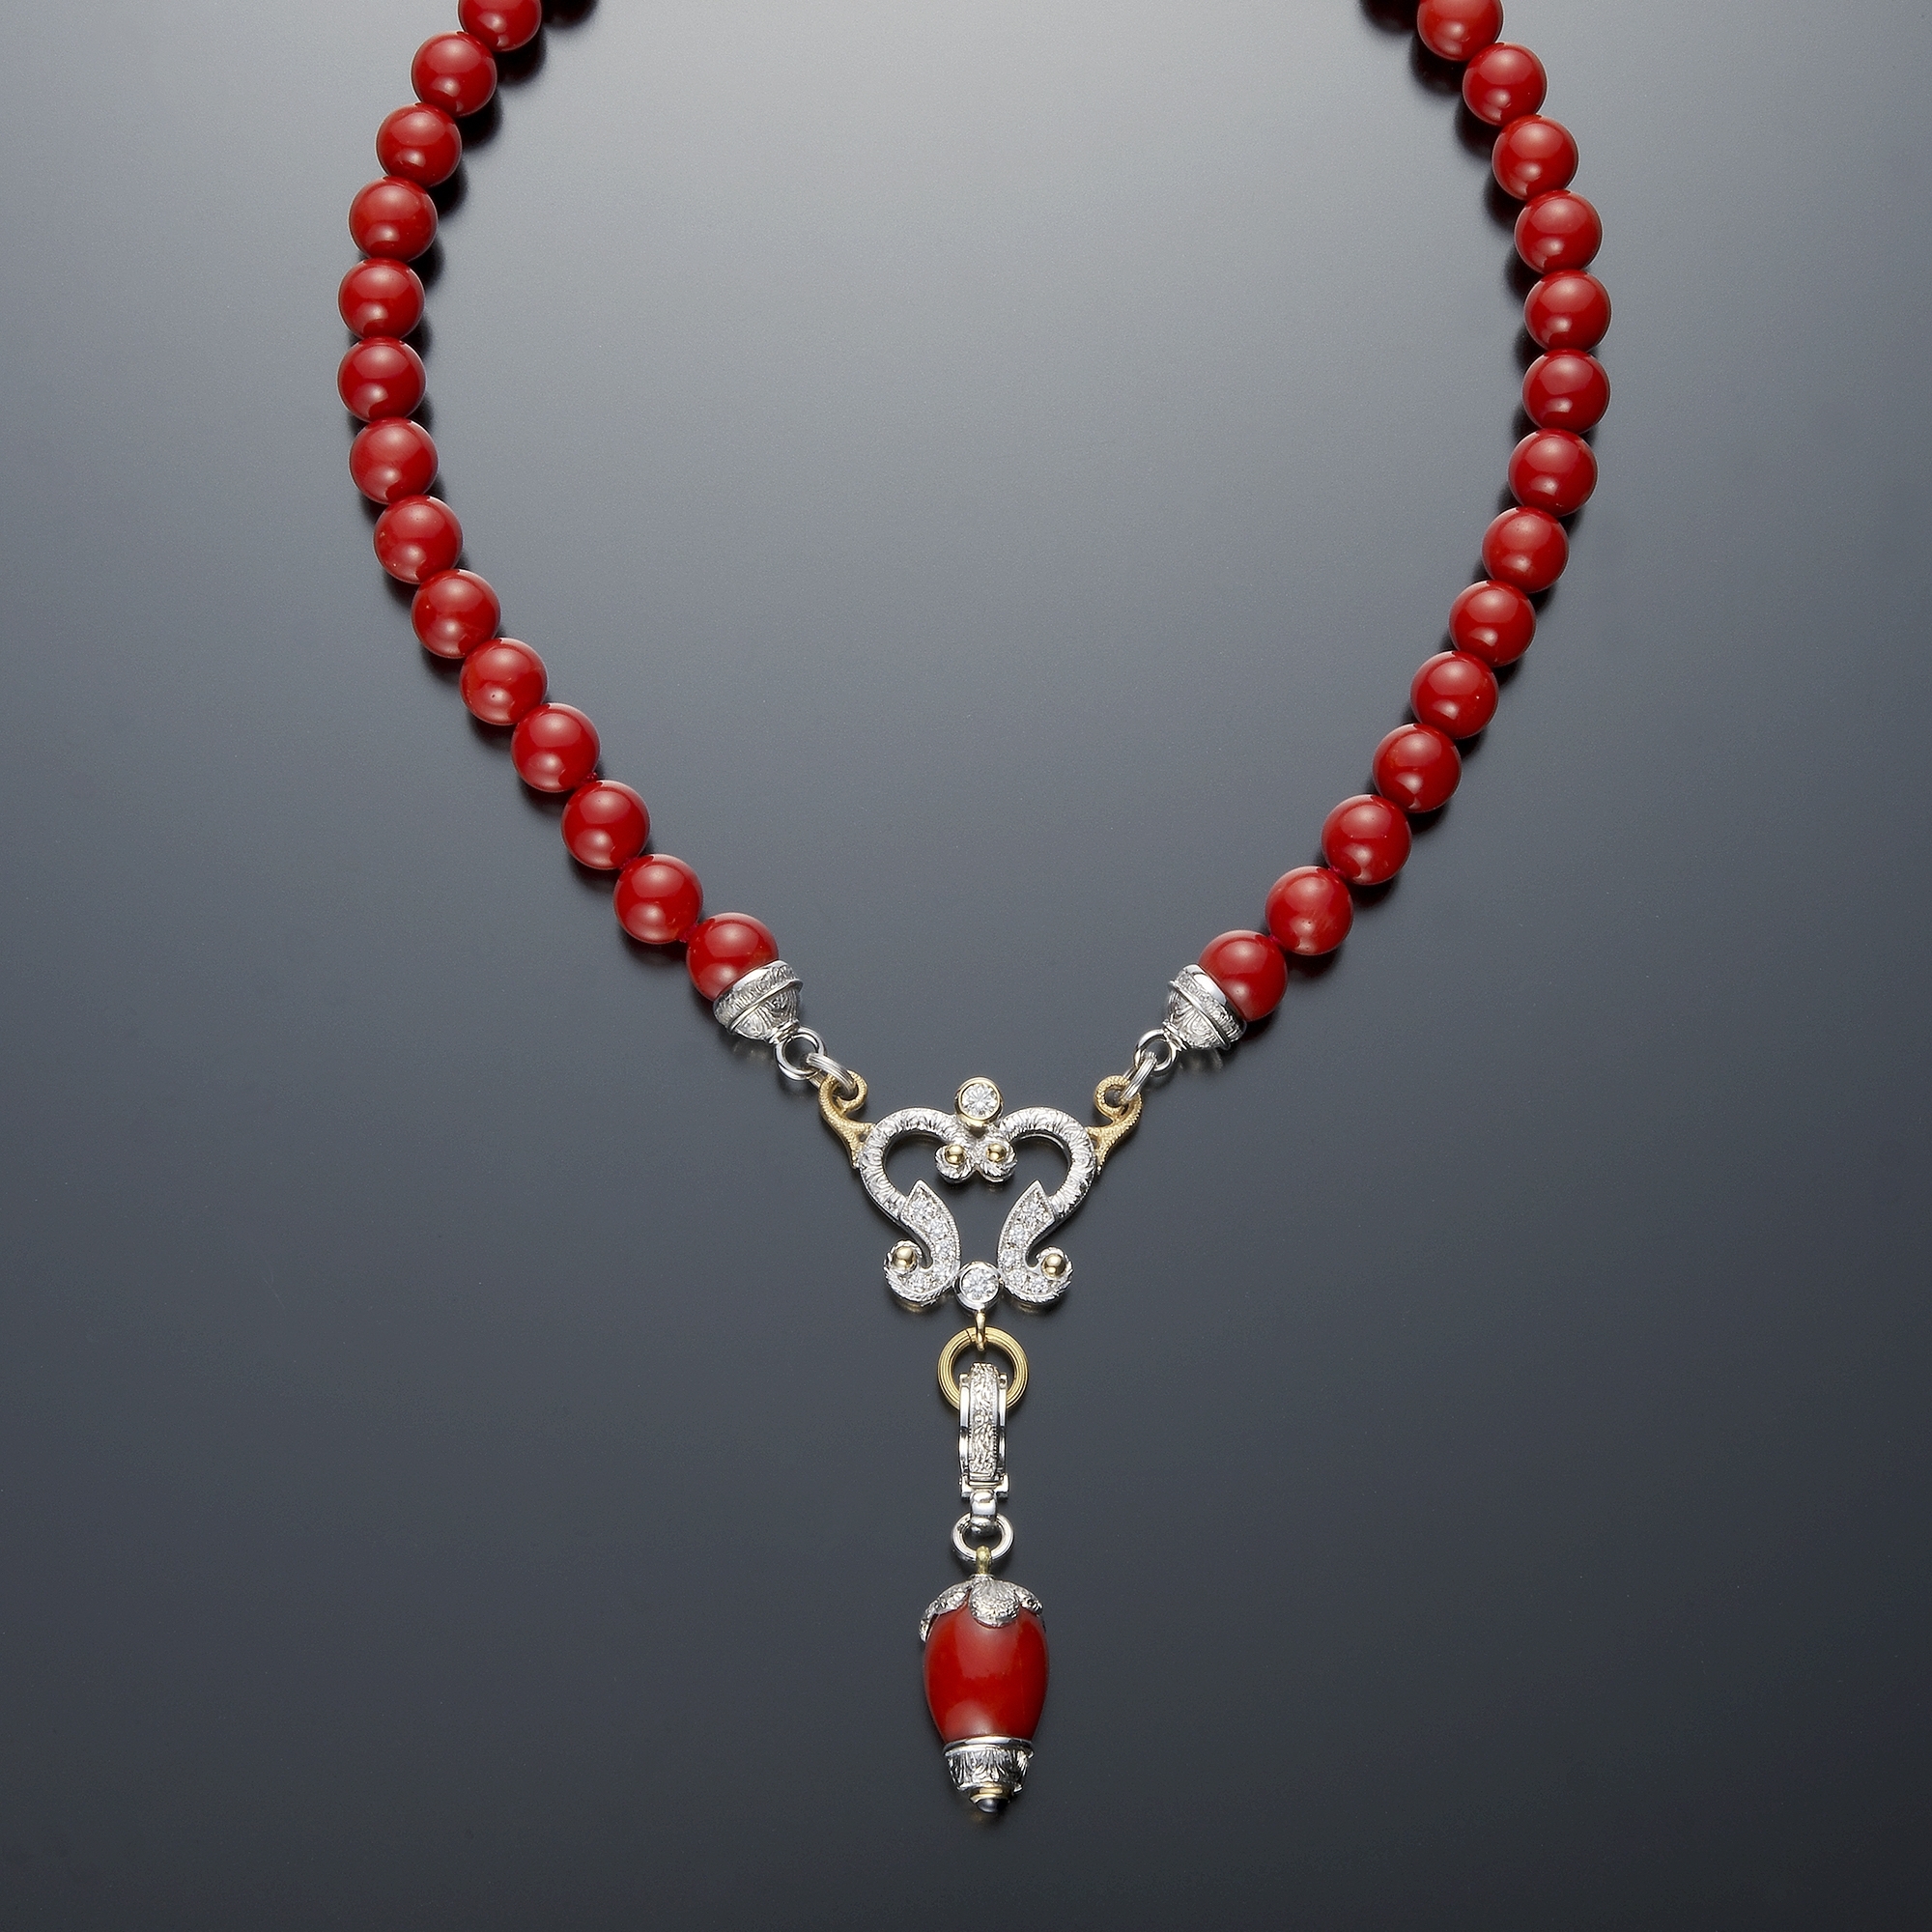 Coral Necklace 珊瑚ネックレス | cazzaniga-japan